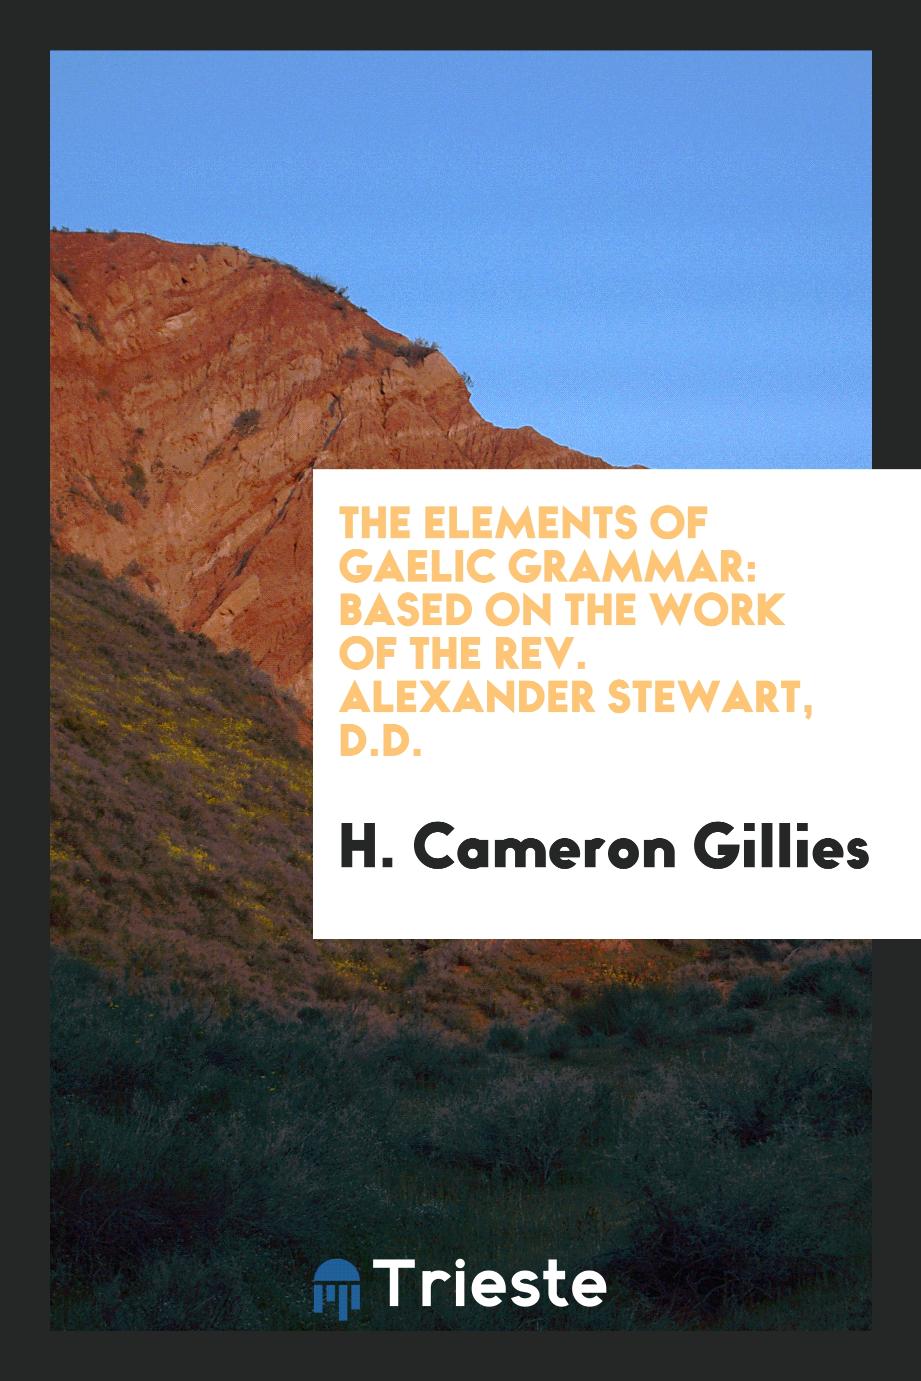 H. Cameron Gillies - The elements of Gaelic grammar: based on the work of the Rev. Alexander Stewart, D.D.